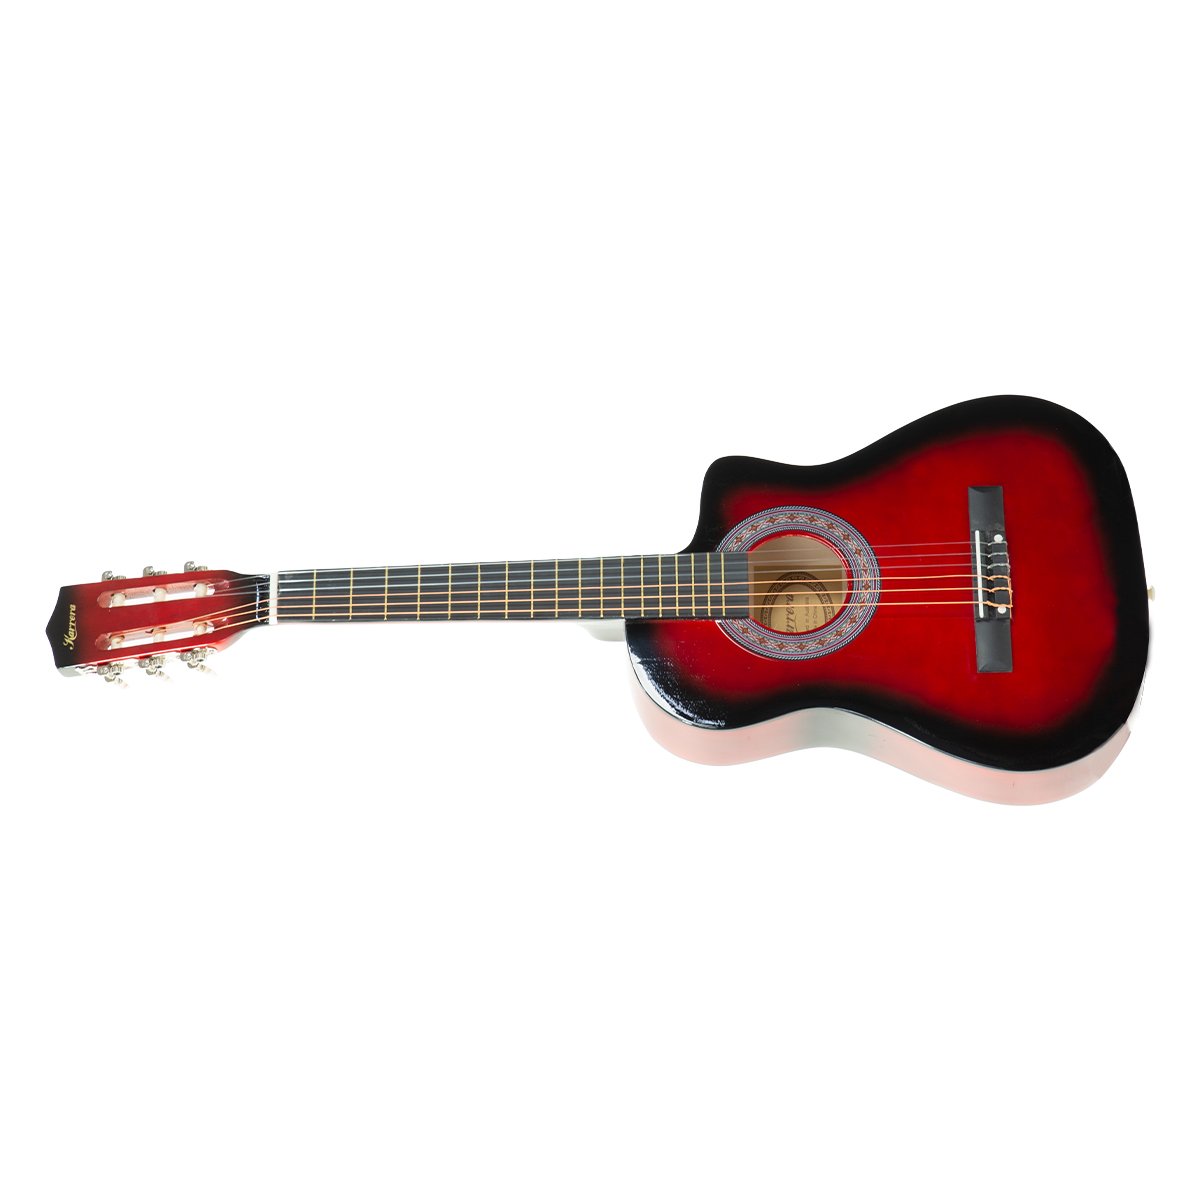 38in Pro Cutaway Acoustic Guitar with guitar bag - Red Burst